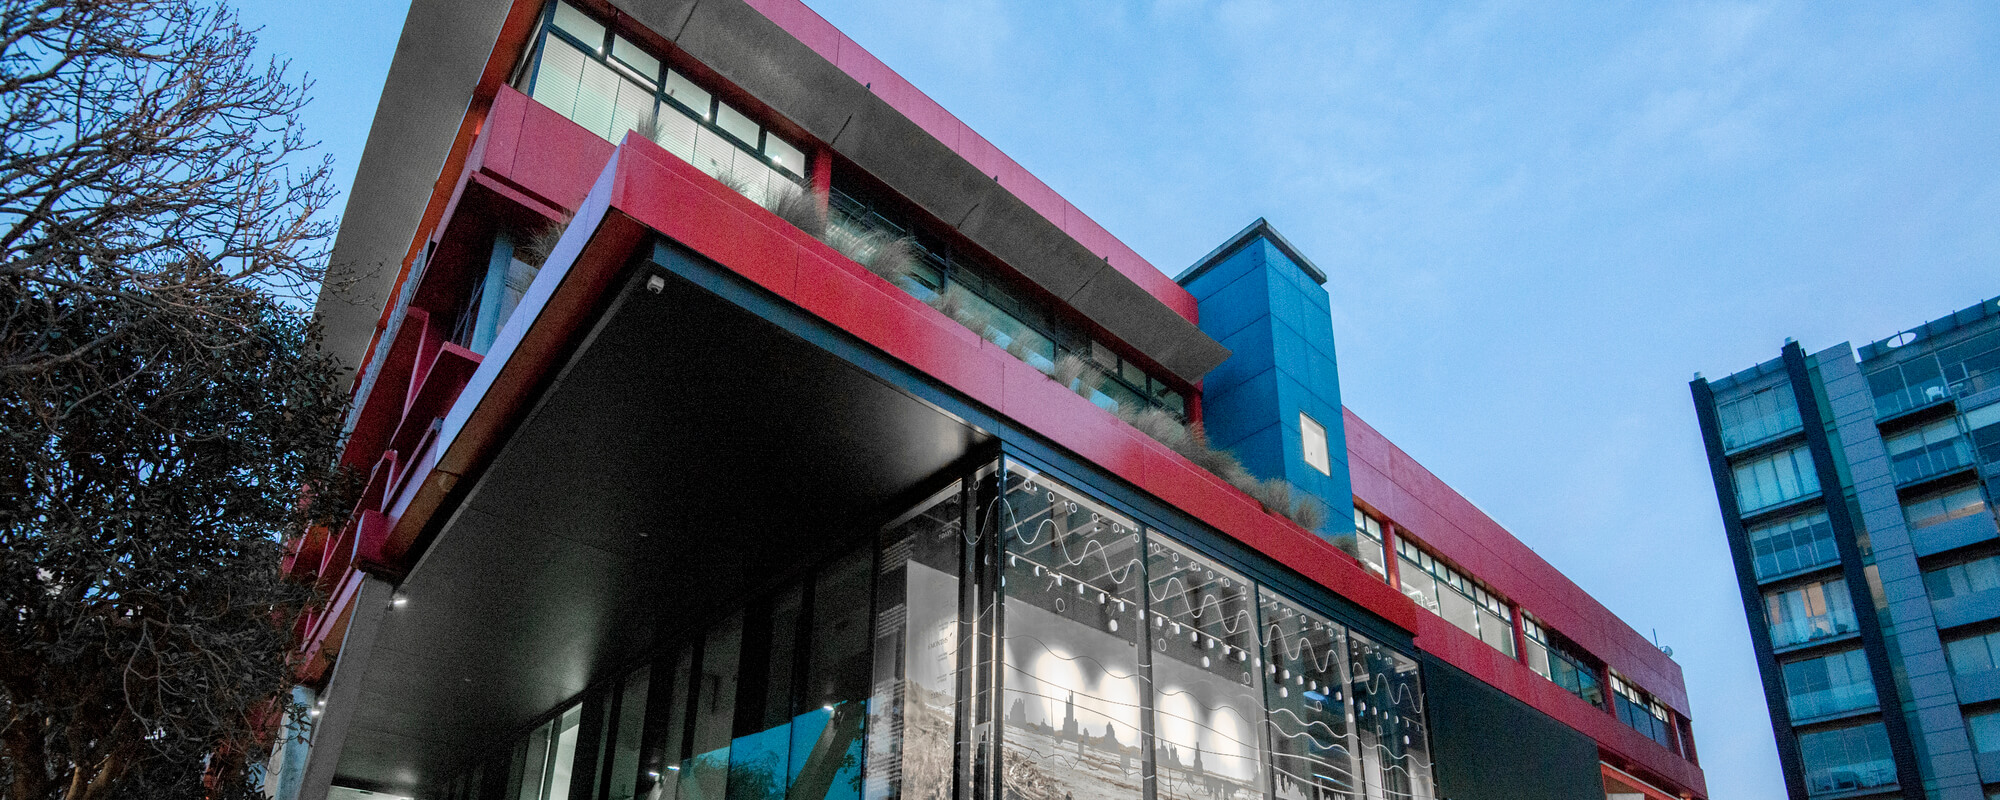 Exterior image of the Wellington School of Architecture.